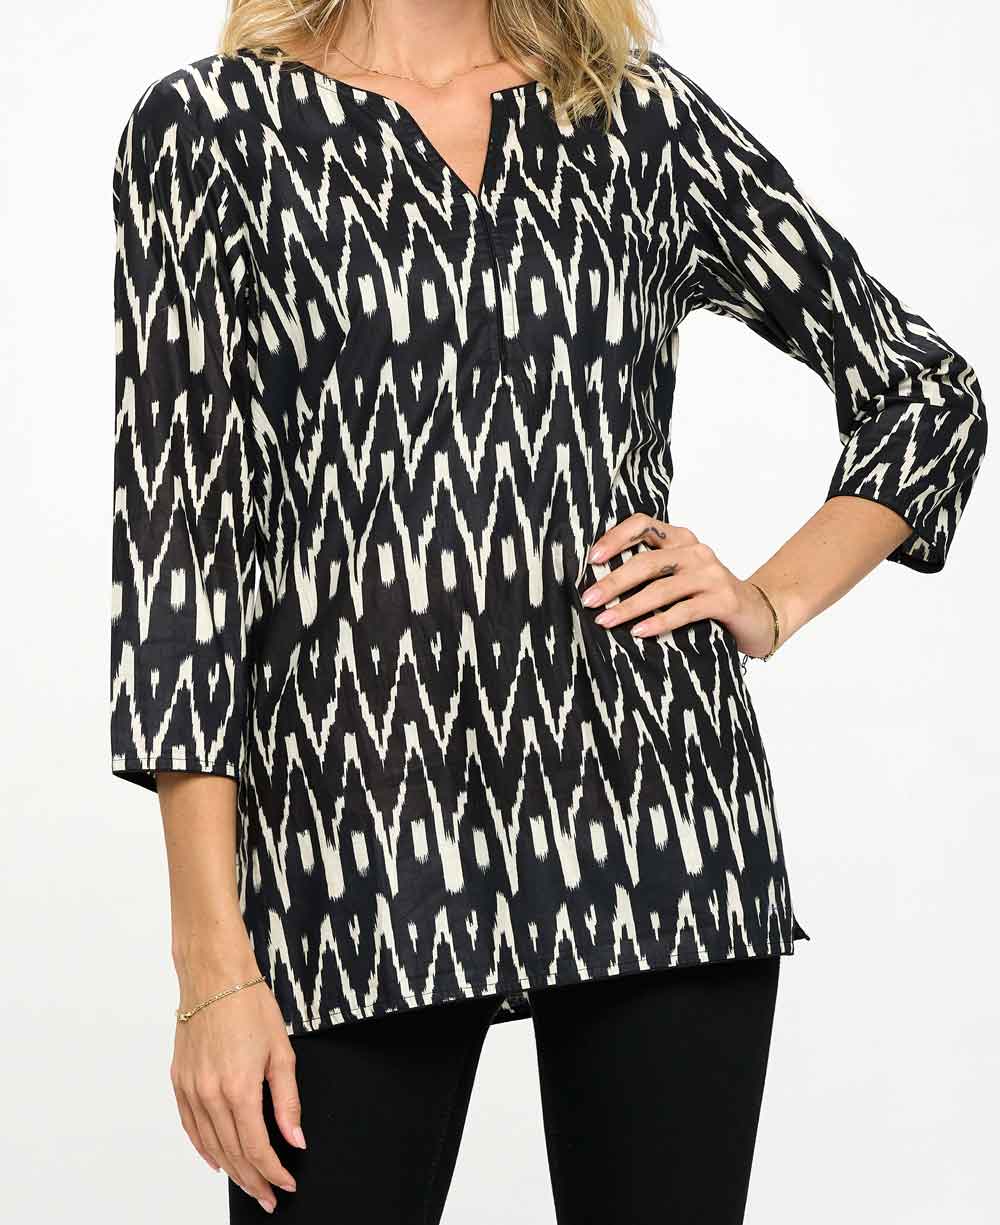 Shop the latest styles right now Black and White Ikat Inspired Cotton ...